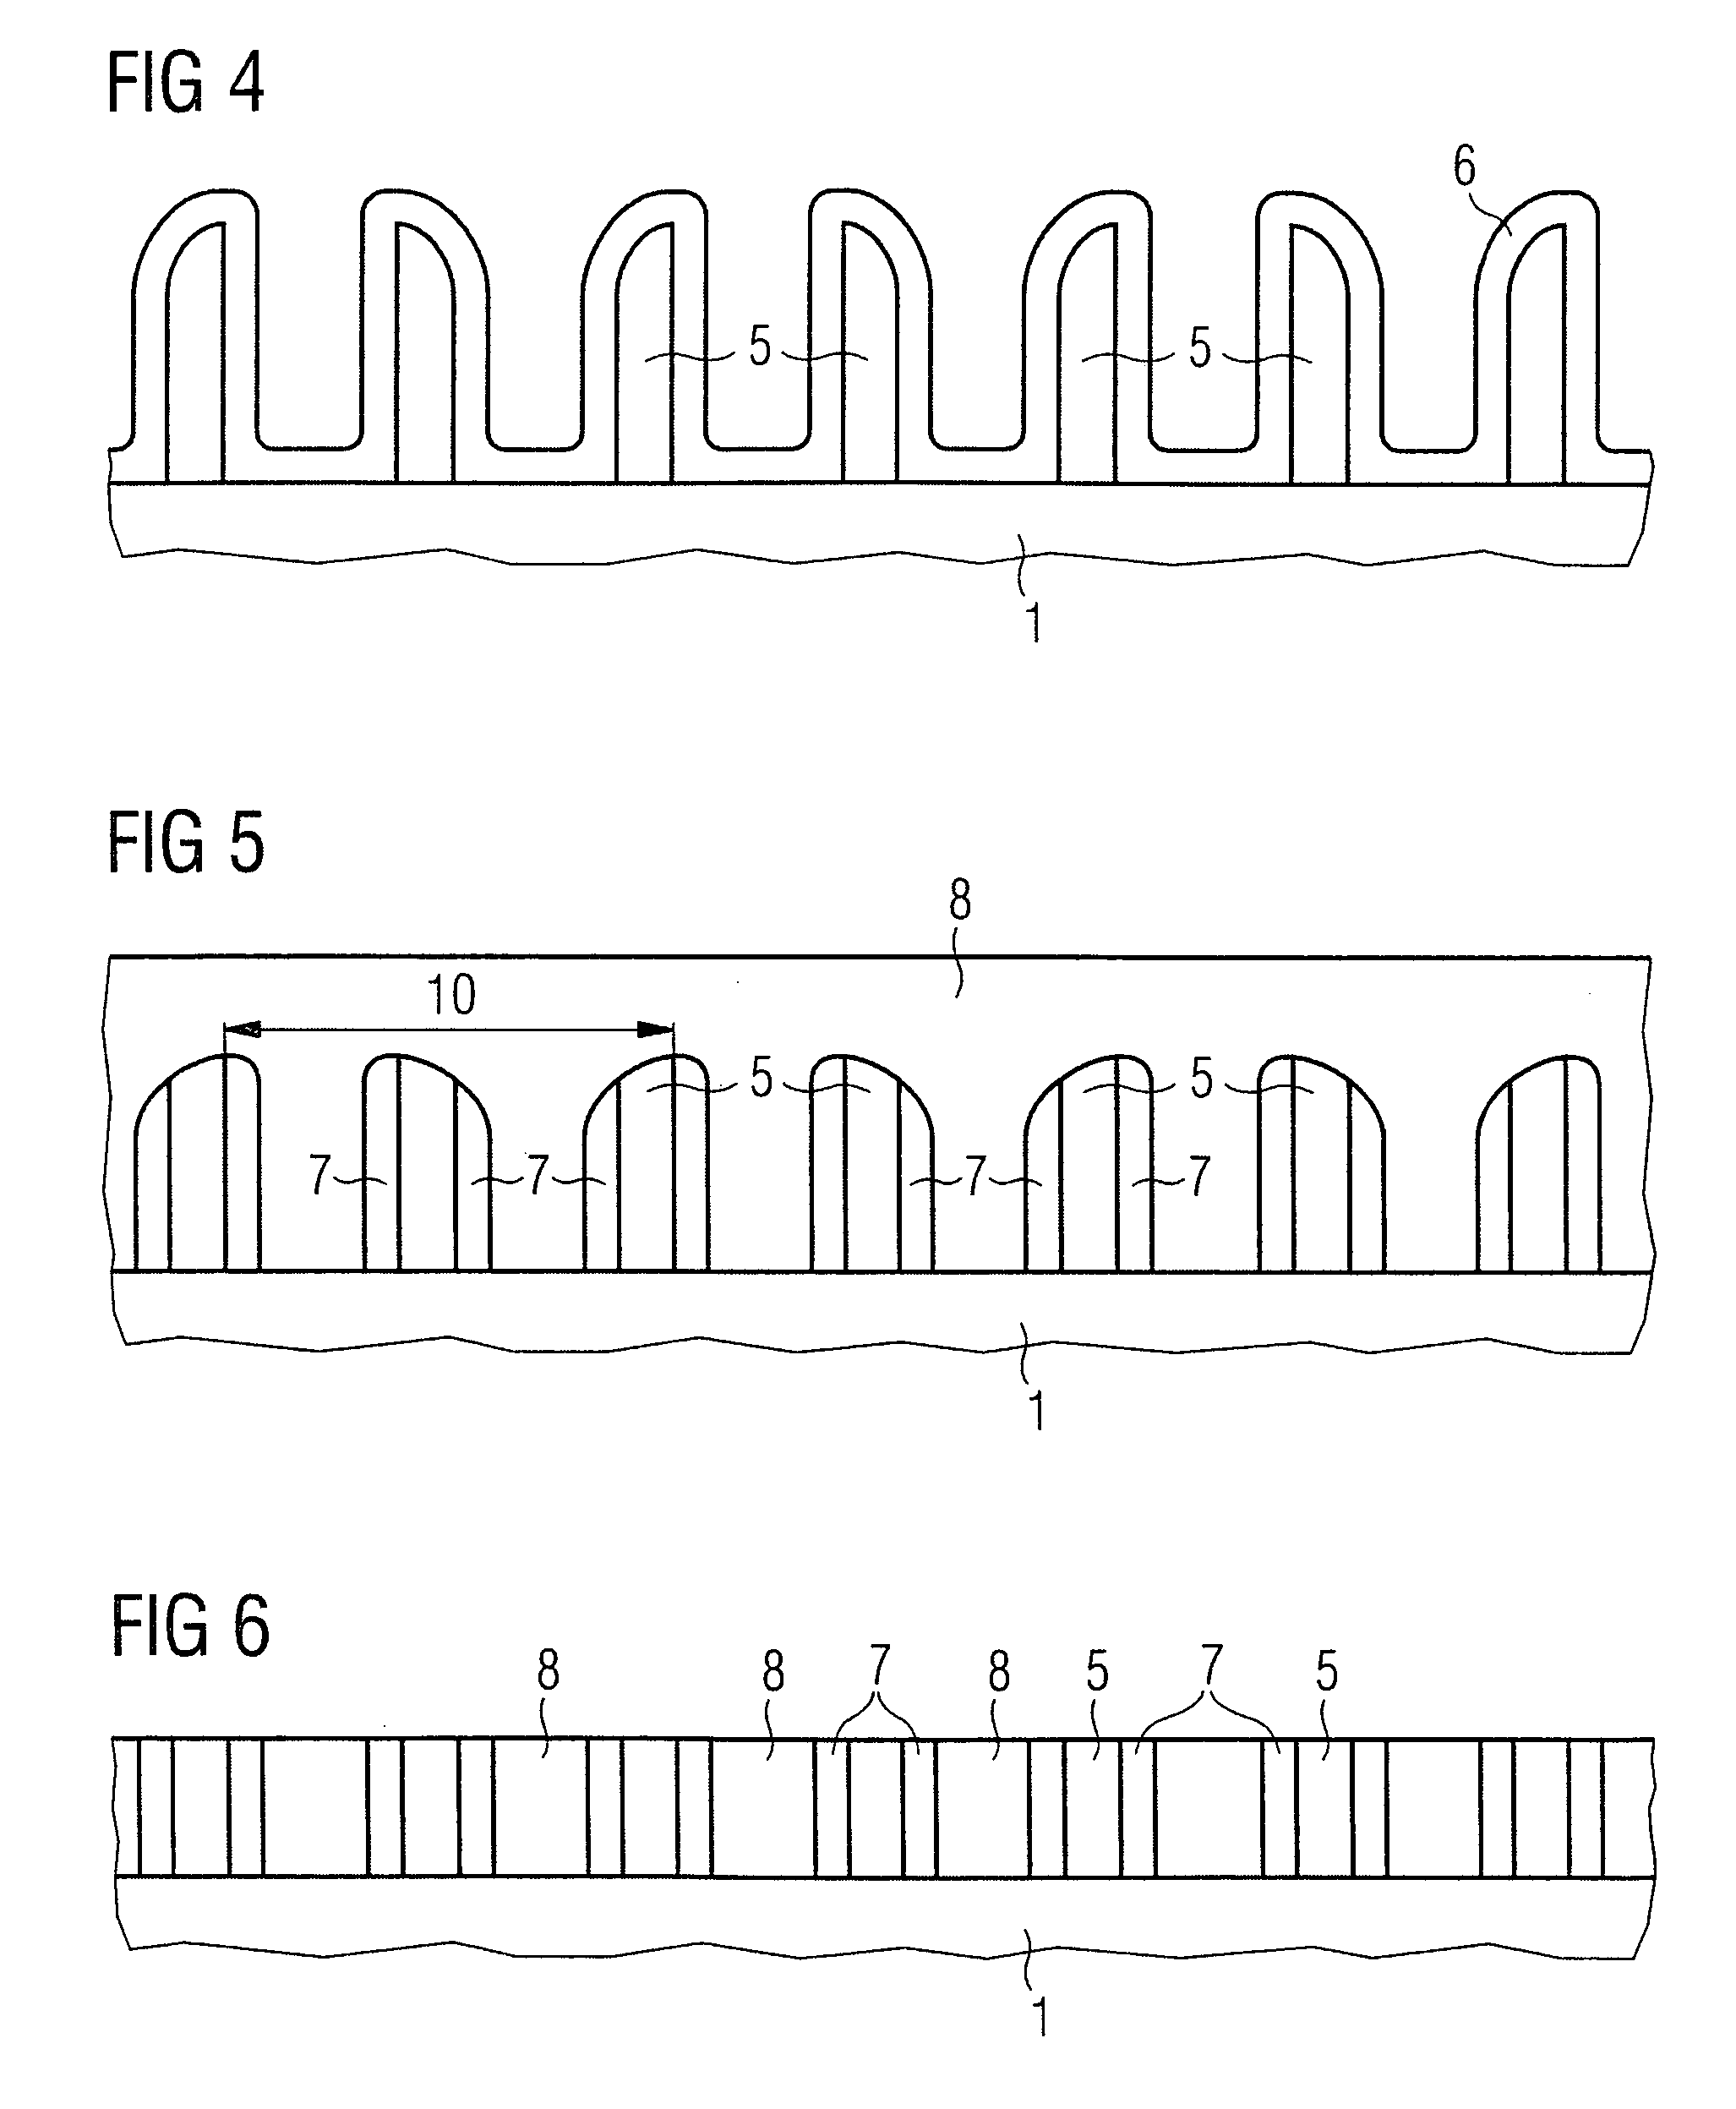 Method of production pitch fractionizations in semiconductor technology